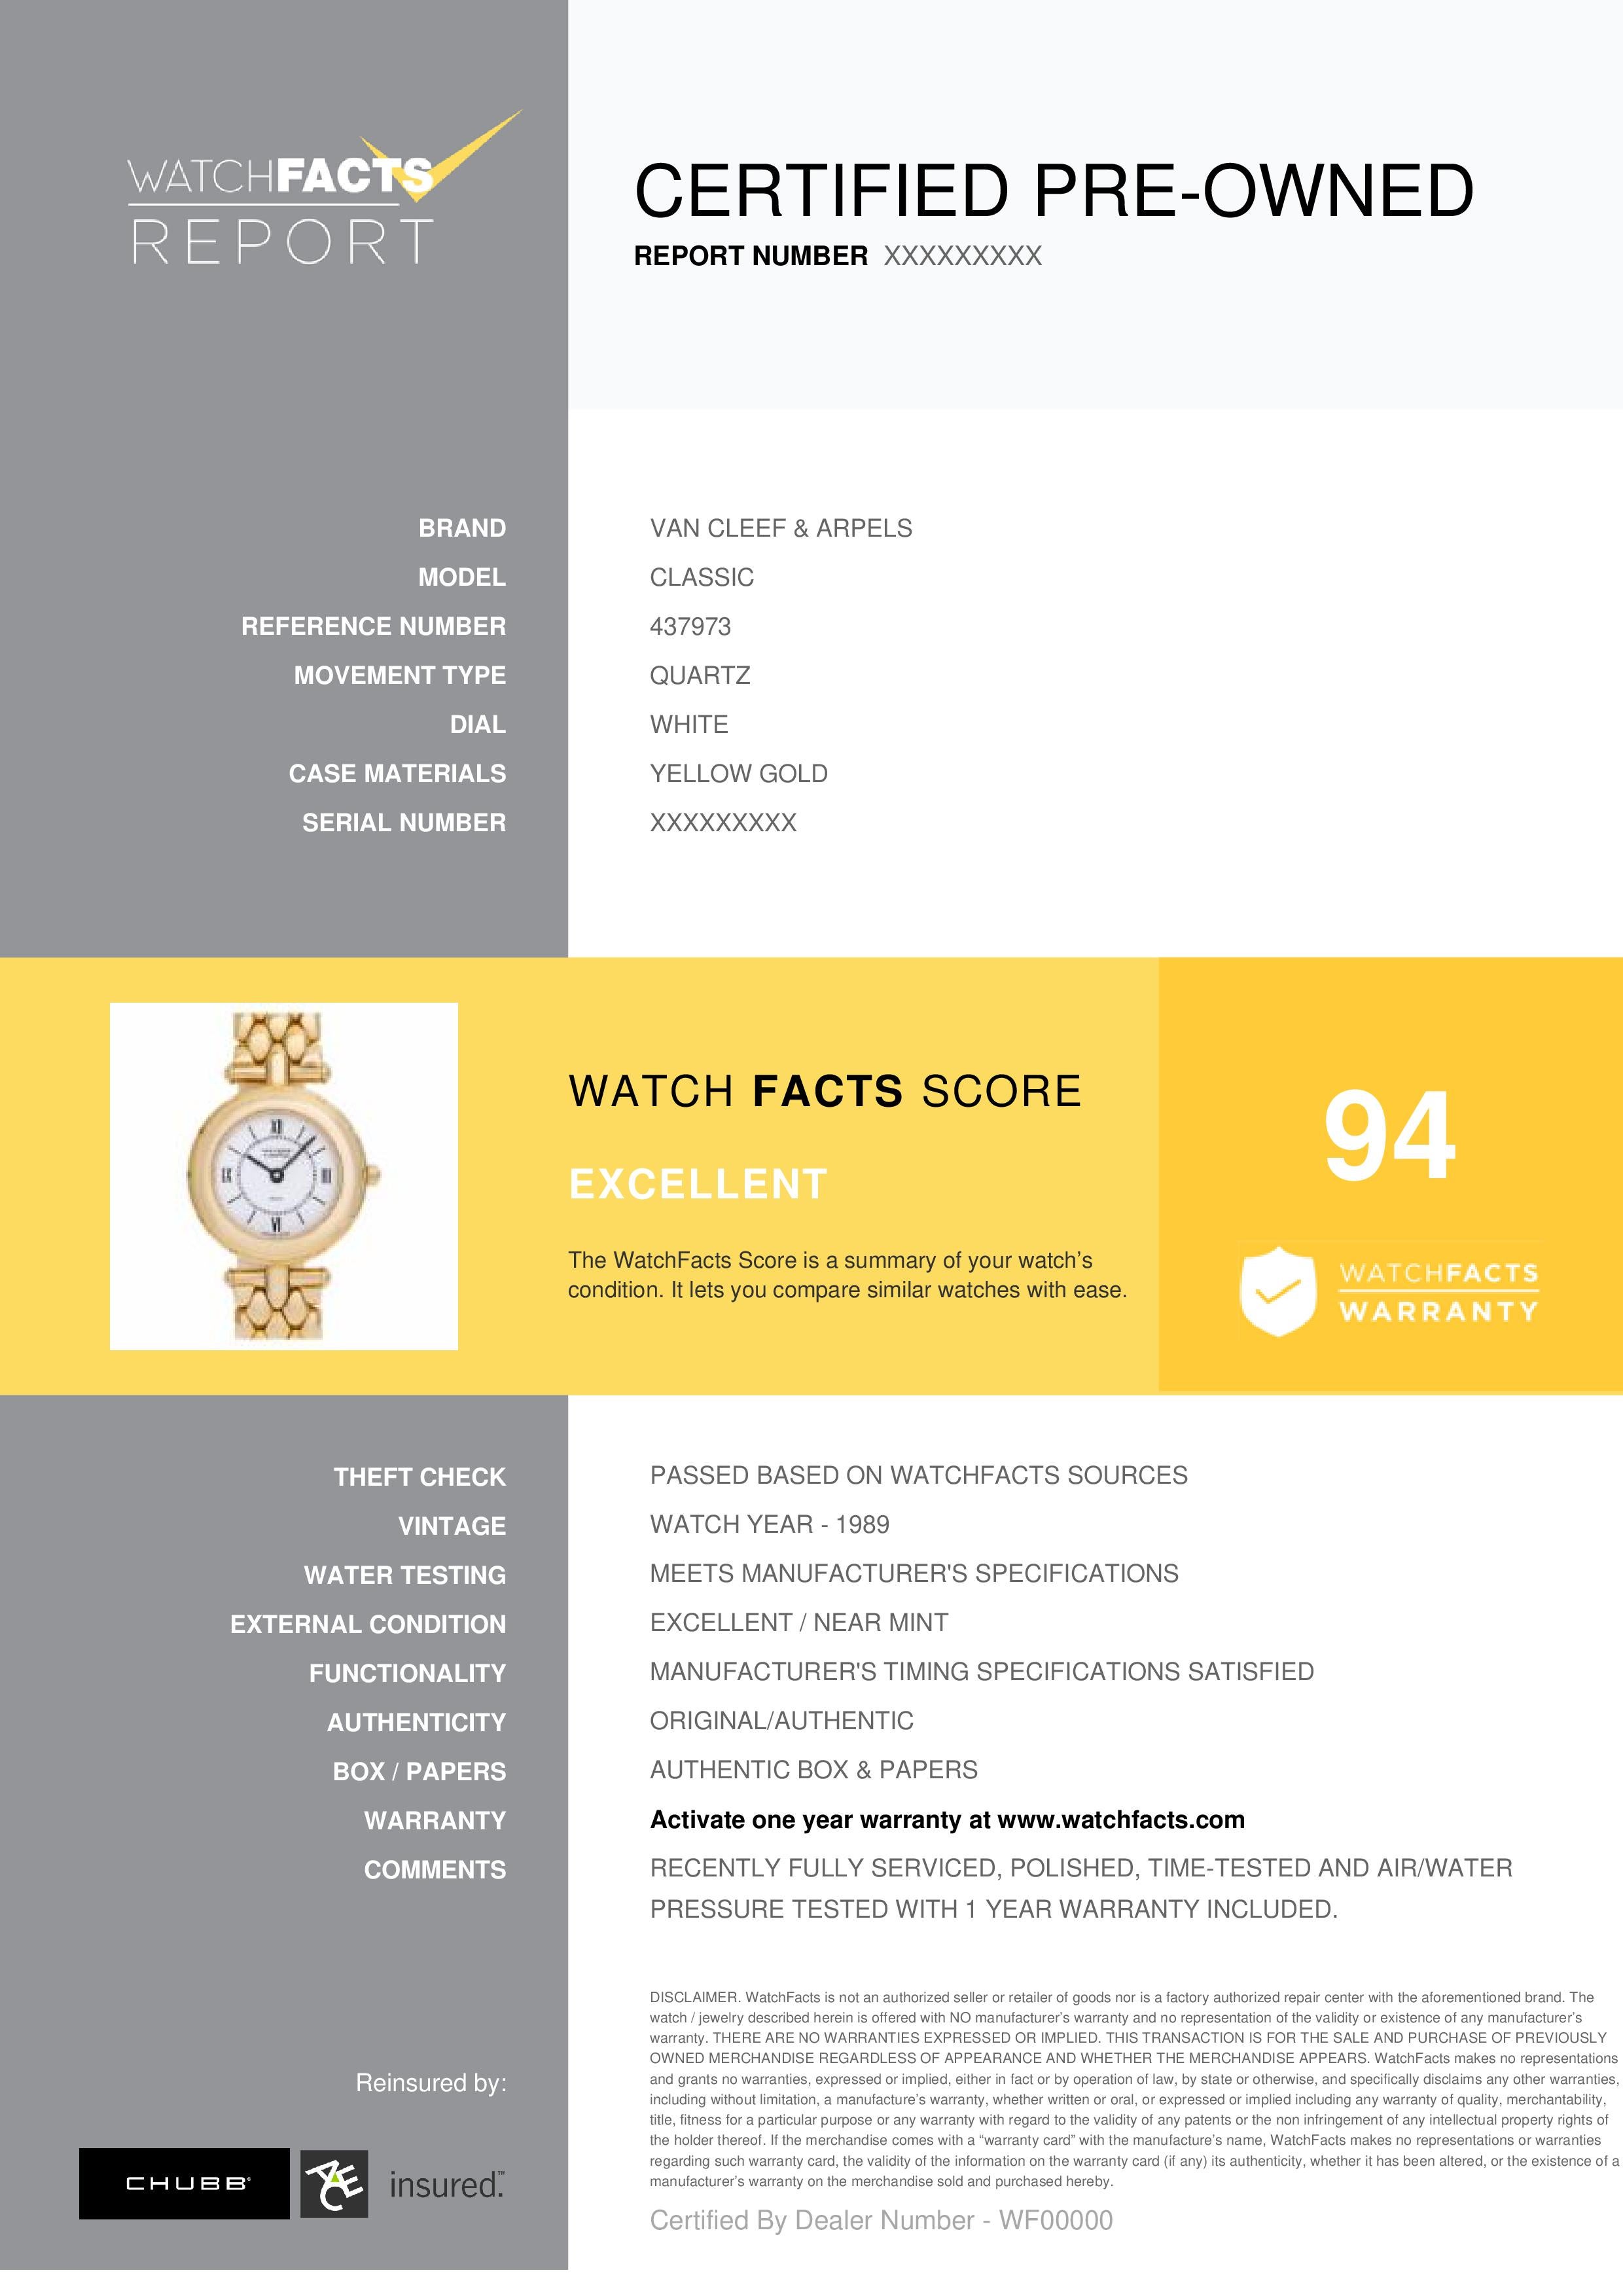 Van Cleef & Arpels Classic Reference #: 437973. Womens Quartz Watch Yellow Gold White 24 MM. Verified and Certified by WatchFacts. 1 year warranty offered by WatchFacts.
